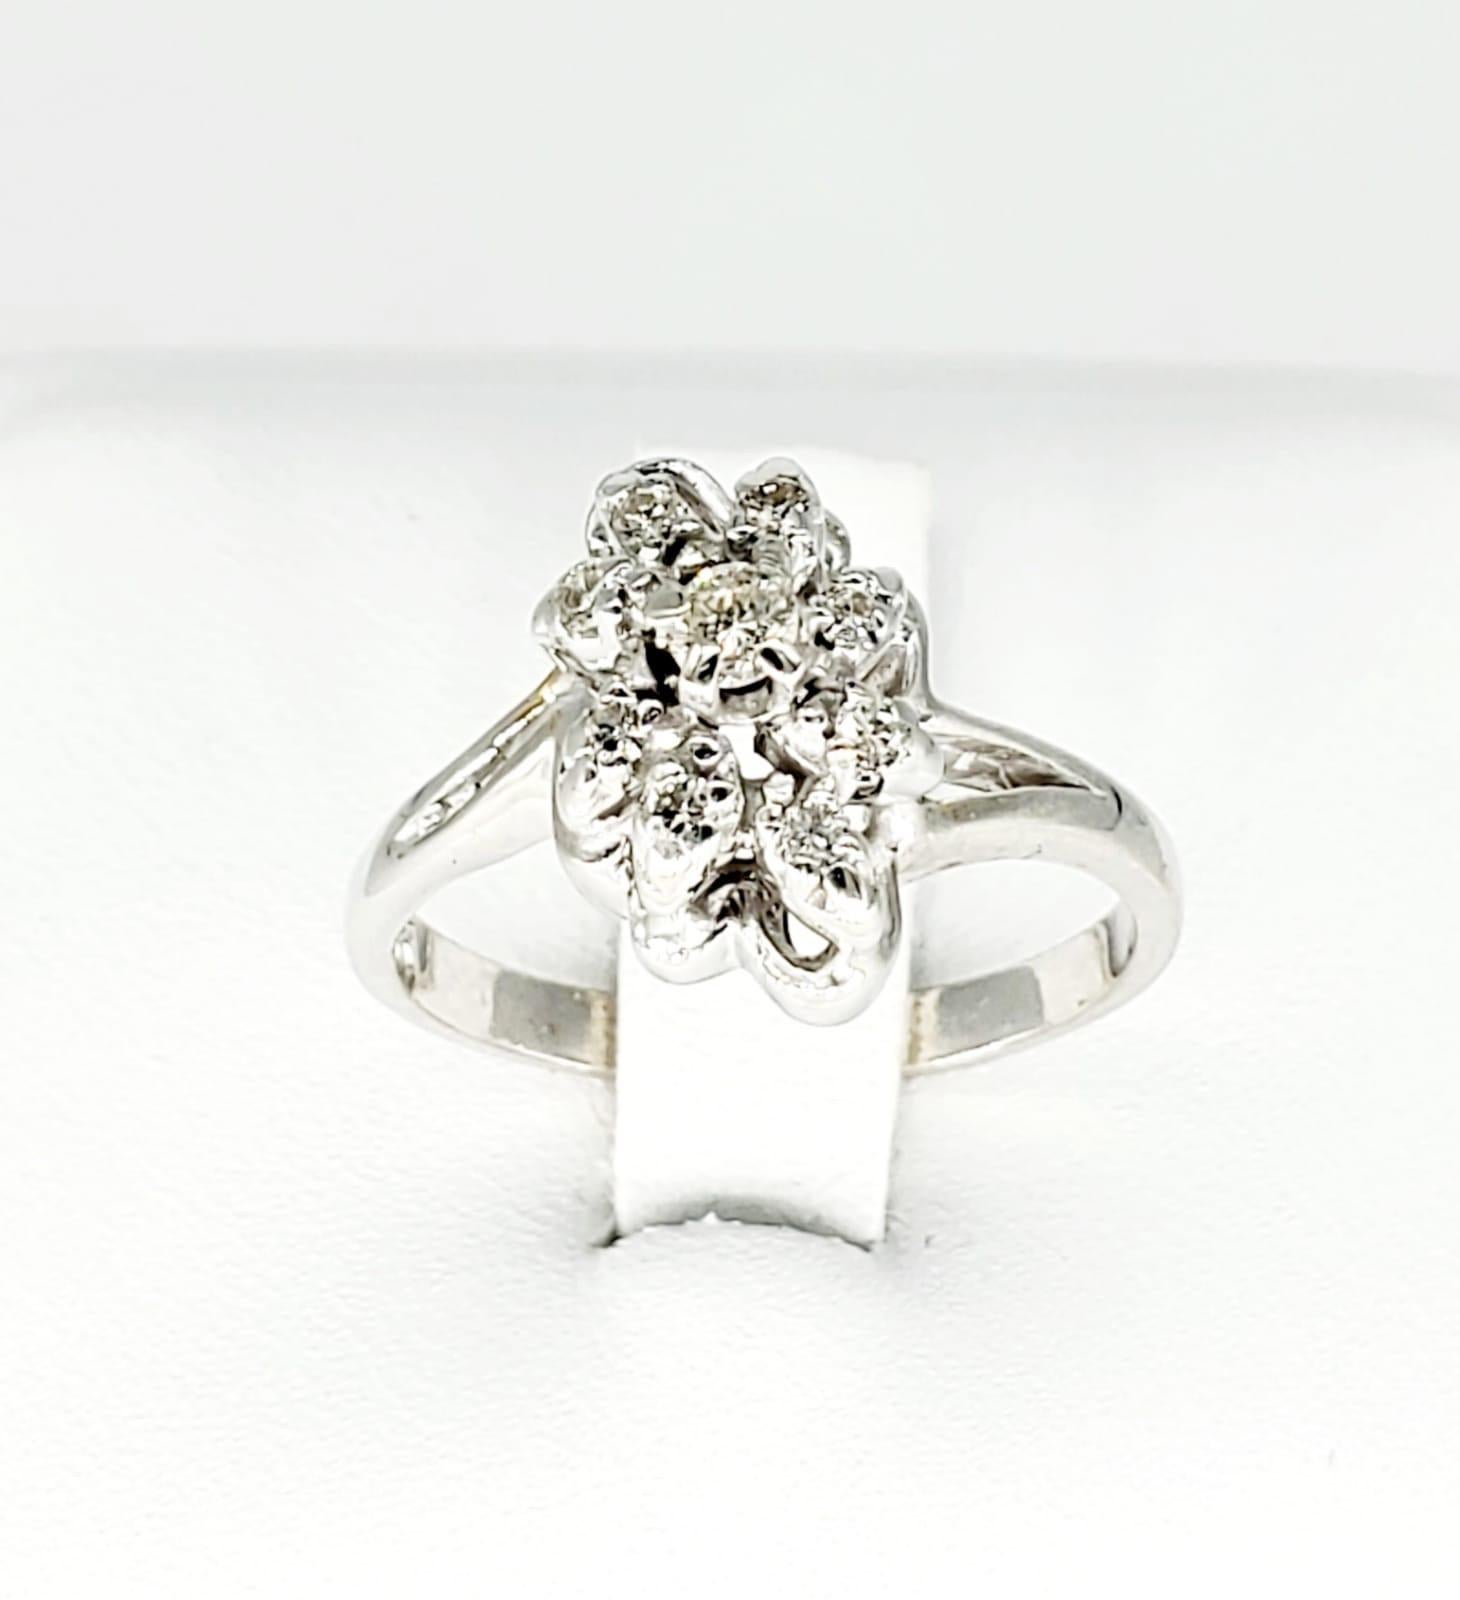 Vintage 0.65 Carat Diamonds Cluster Ring 14k White Gold. The ring weights 4.9 grams and is a size 7.